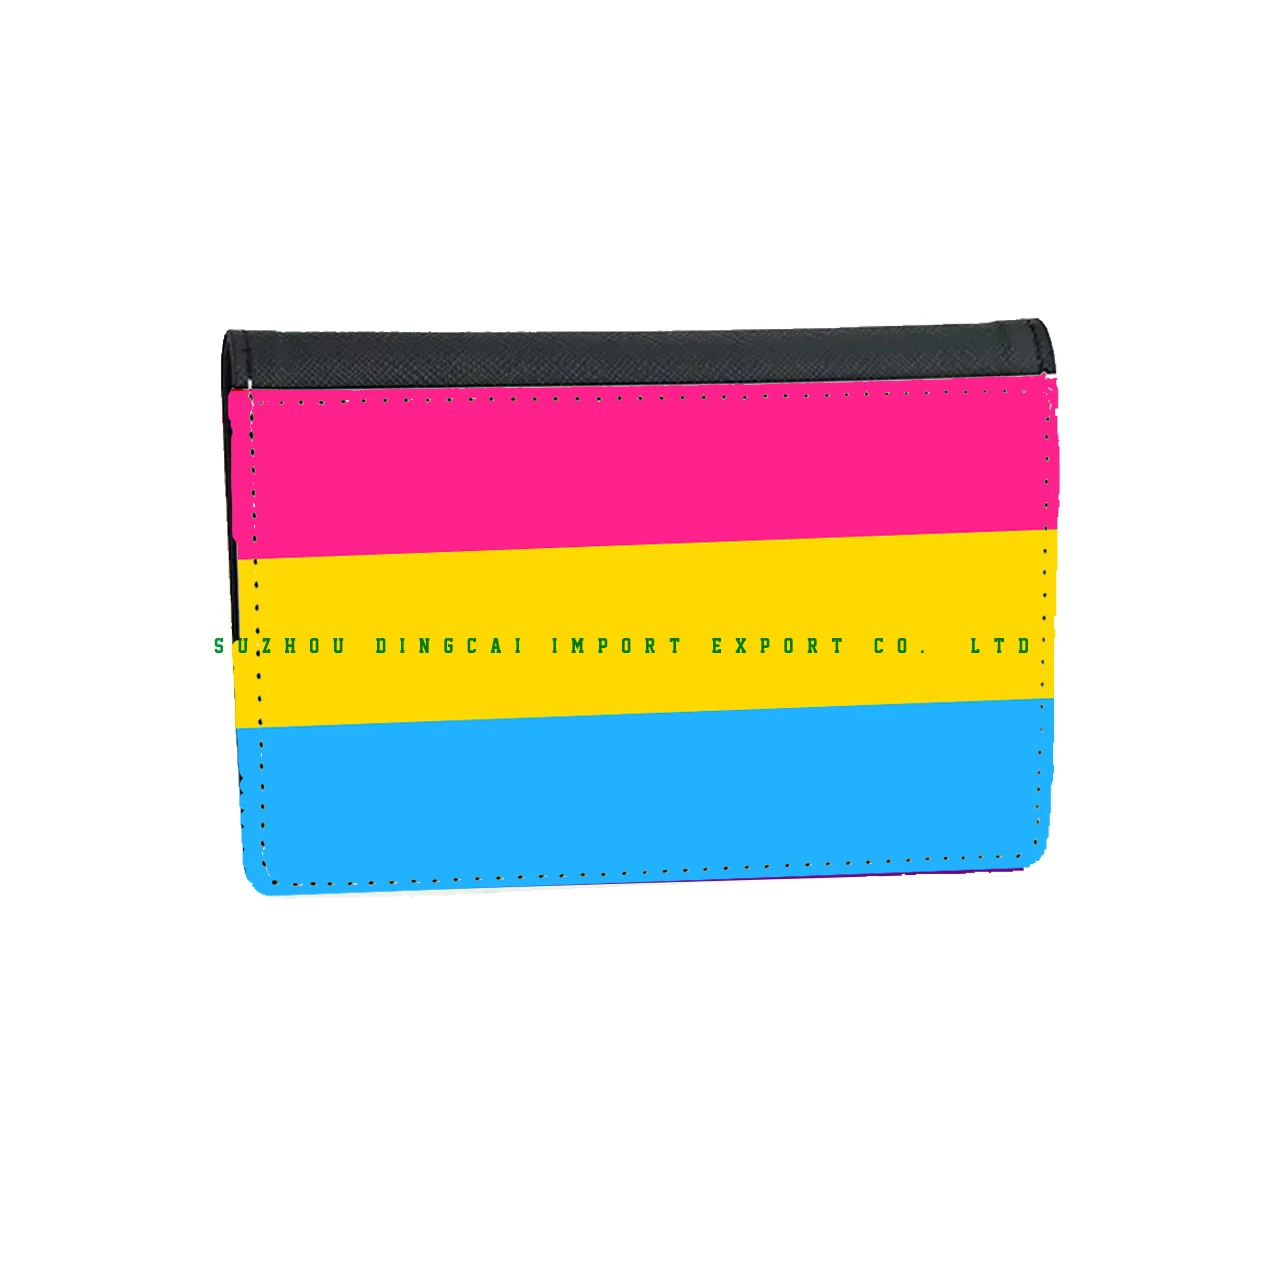 Top Quality 14.6X9cm  PU faux leather LGBT Rainbow Pansexual Pride Passport Holder